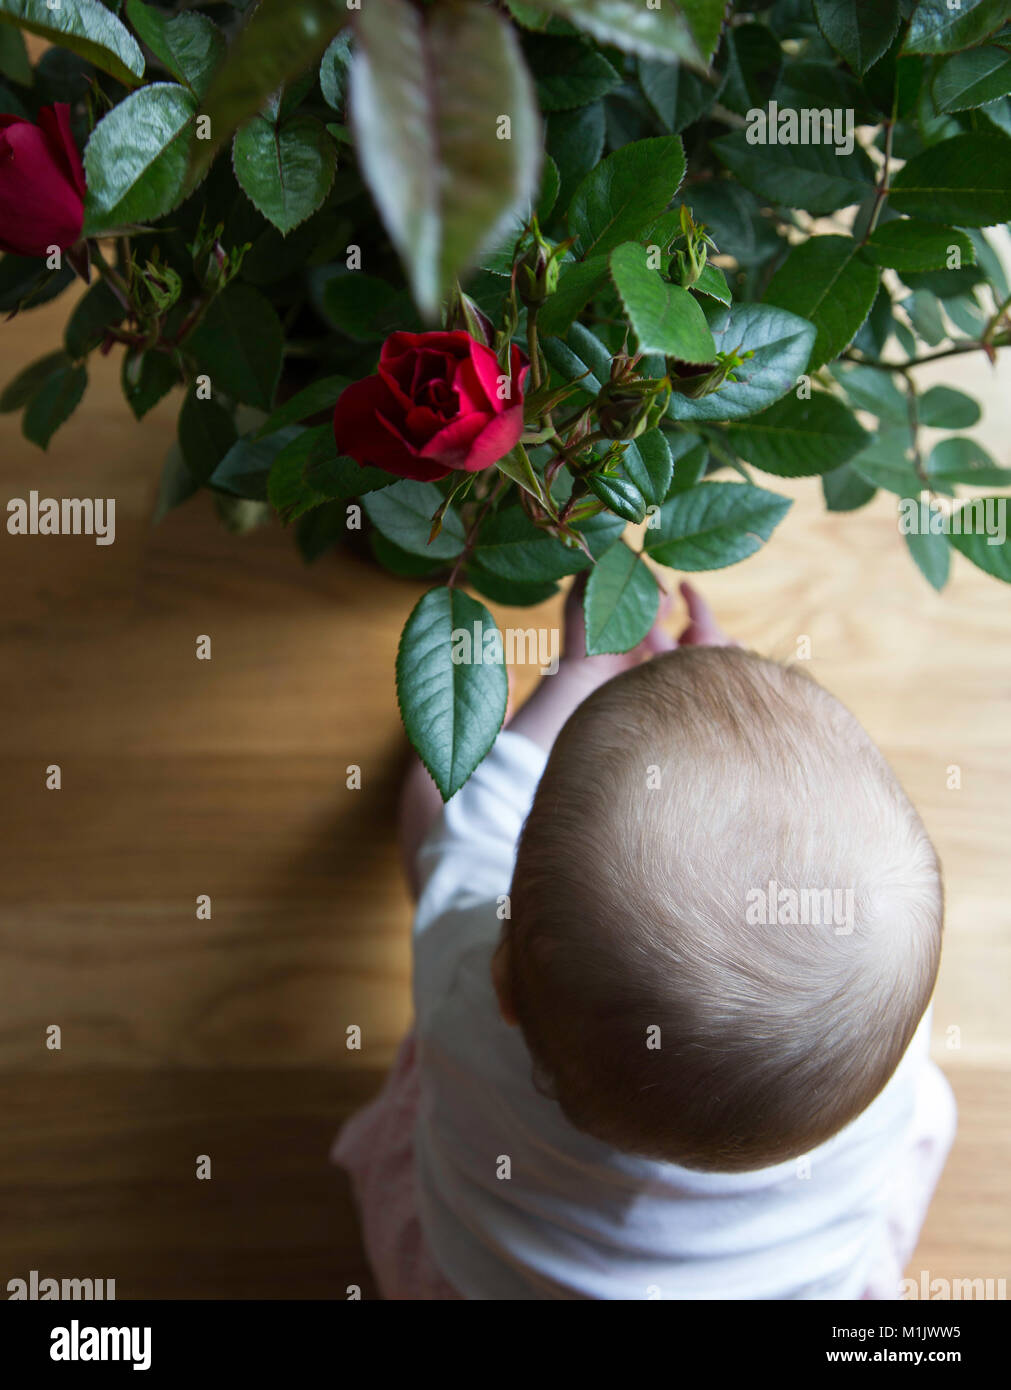 High Angle View of Baby Touching Rose Plant Stock Photo